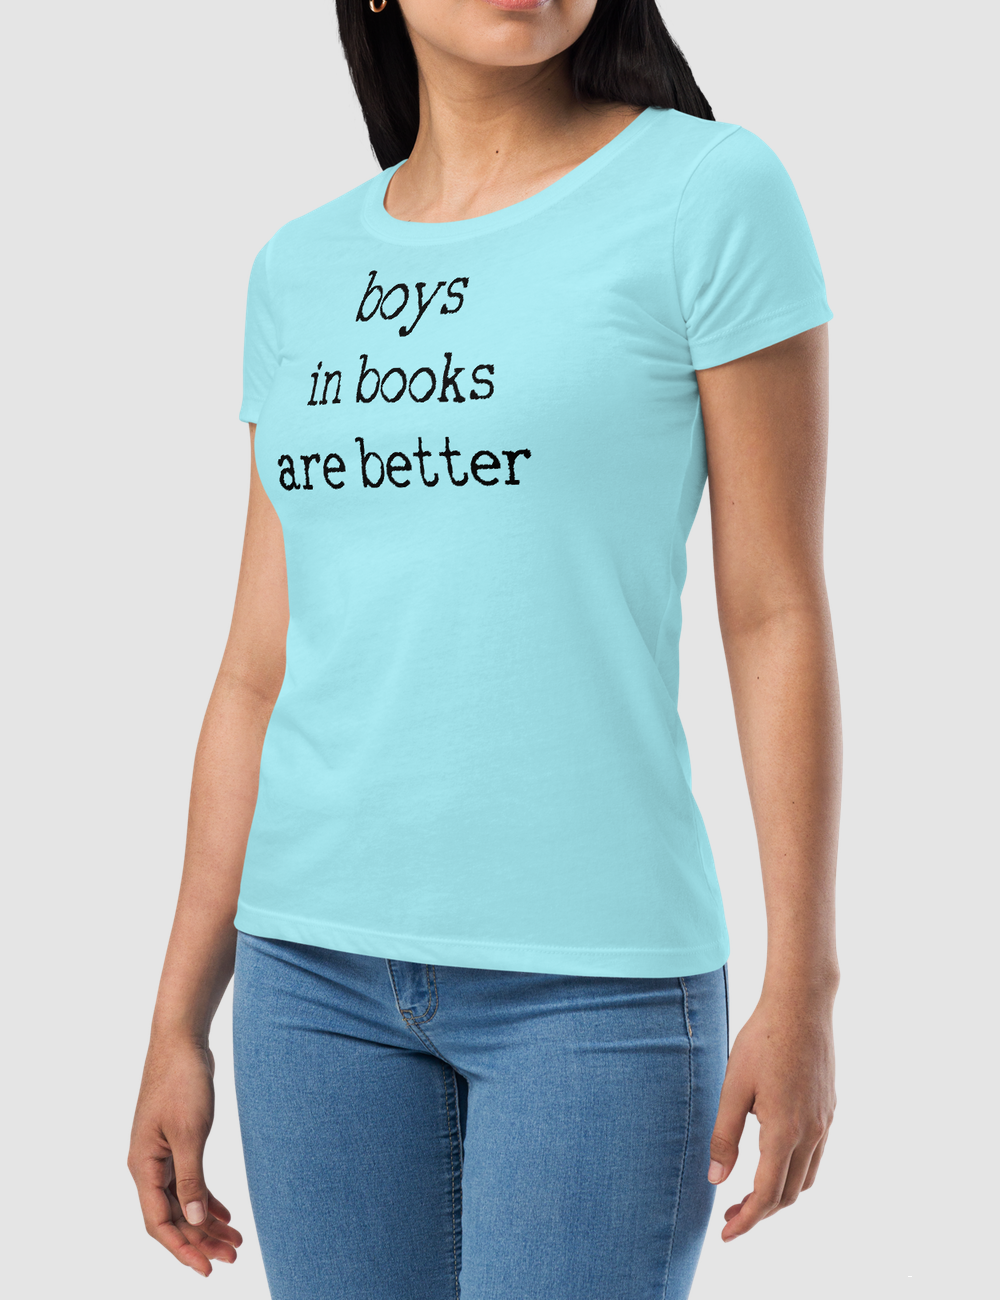 Boys In Books Are Better | Women's Fitted T-Shirt OniTakai